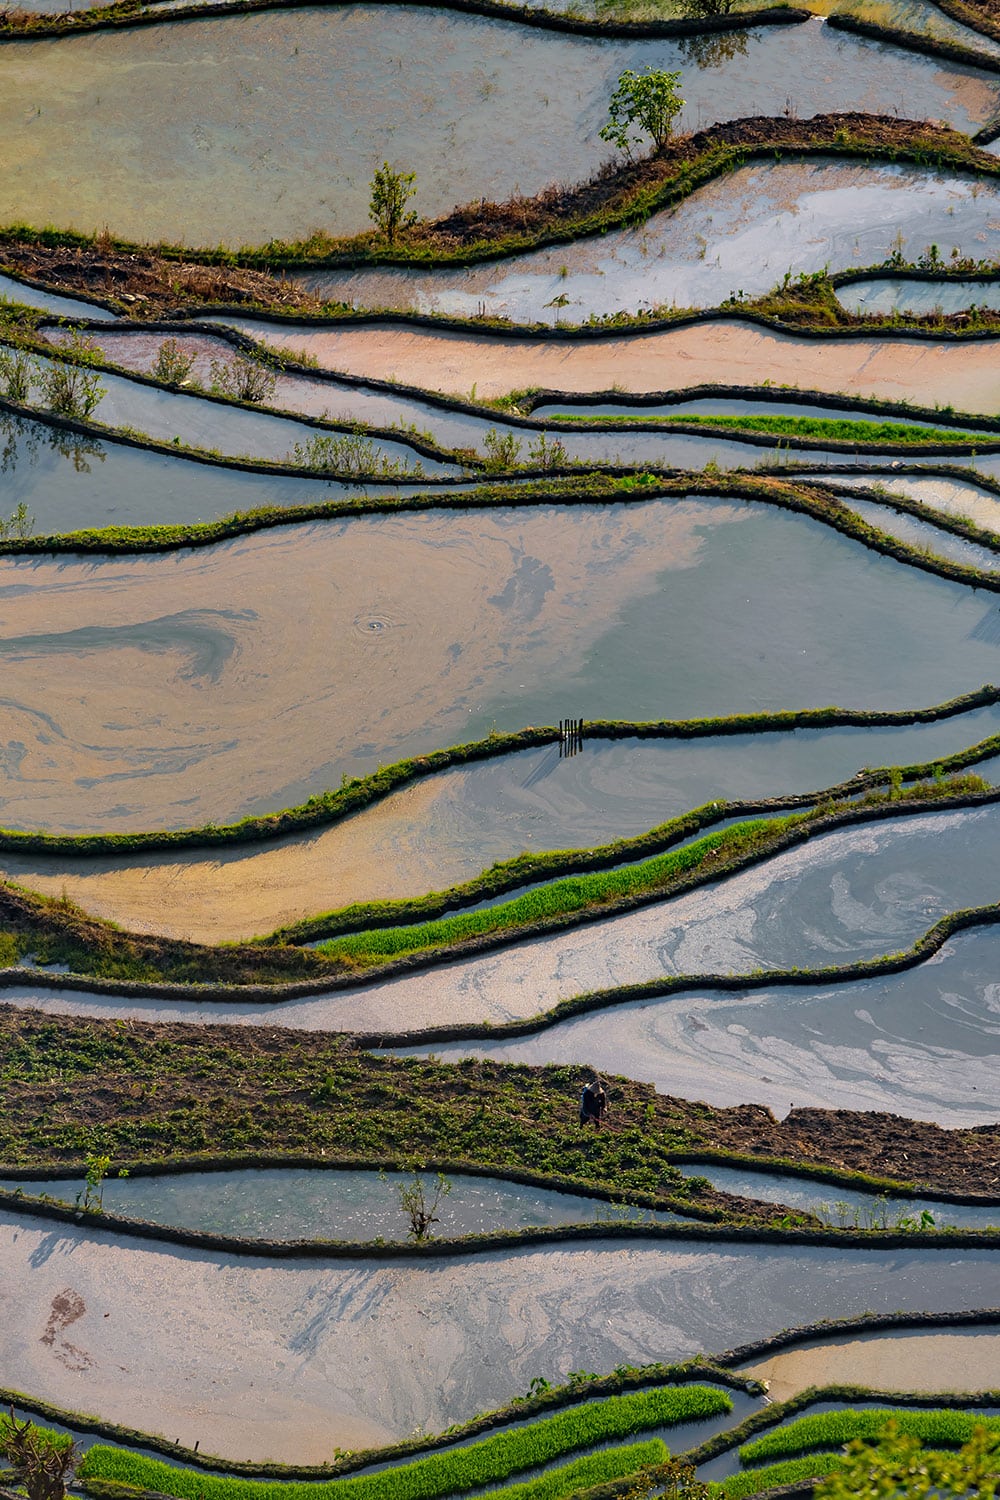 View on rice terraces of scenic spot in Yuanyang, China